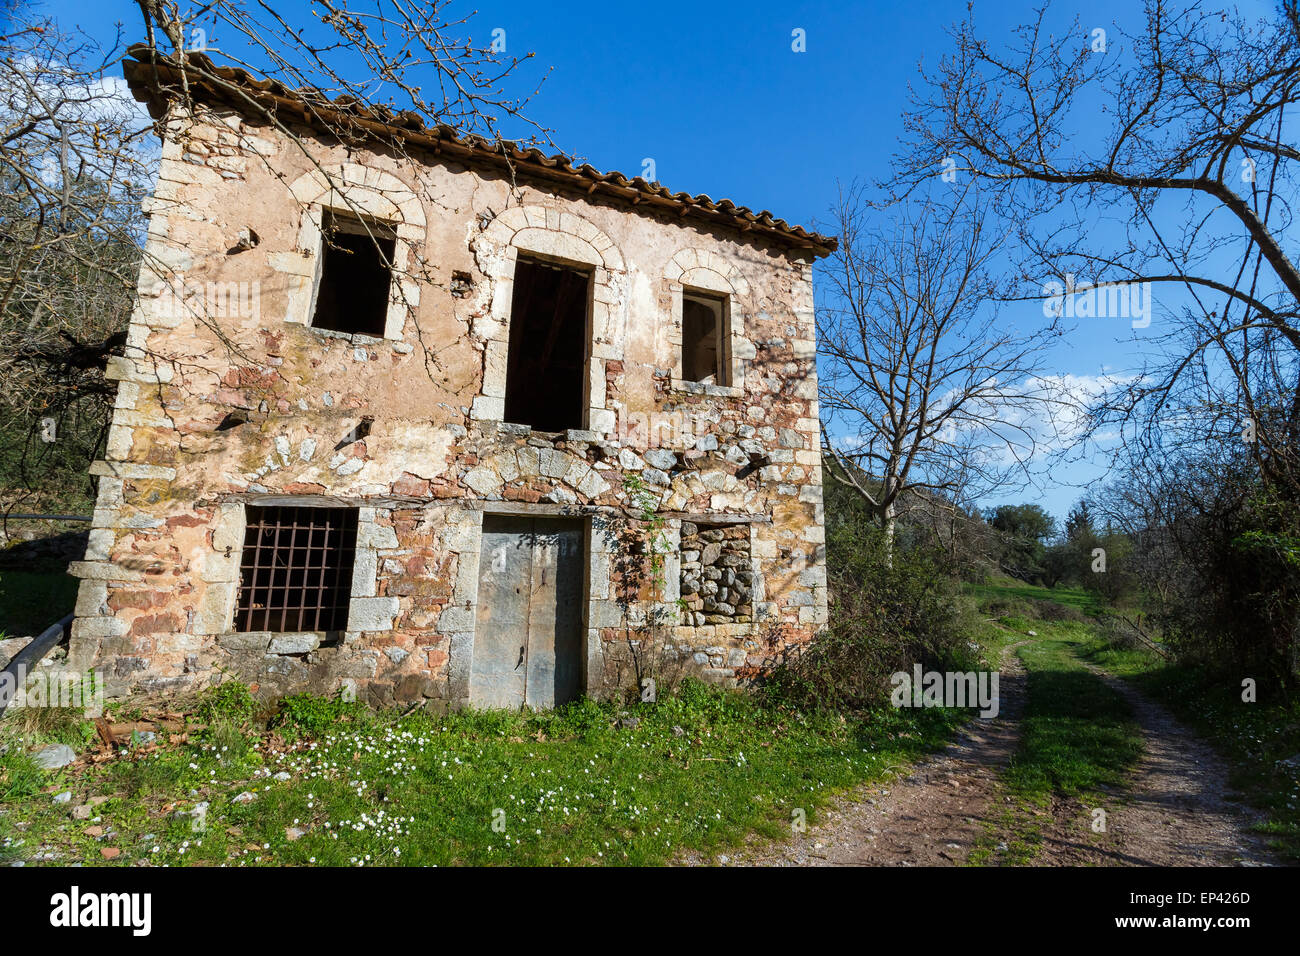 Old abandoned stone house ruins in countryside in Greece against a blue sky Stock Photo